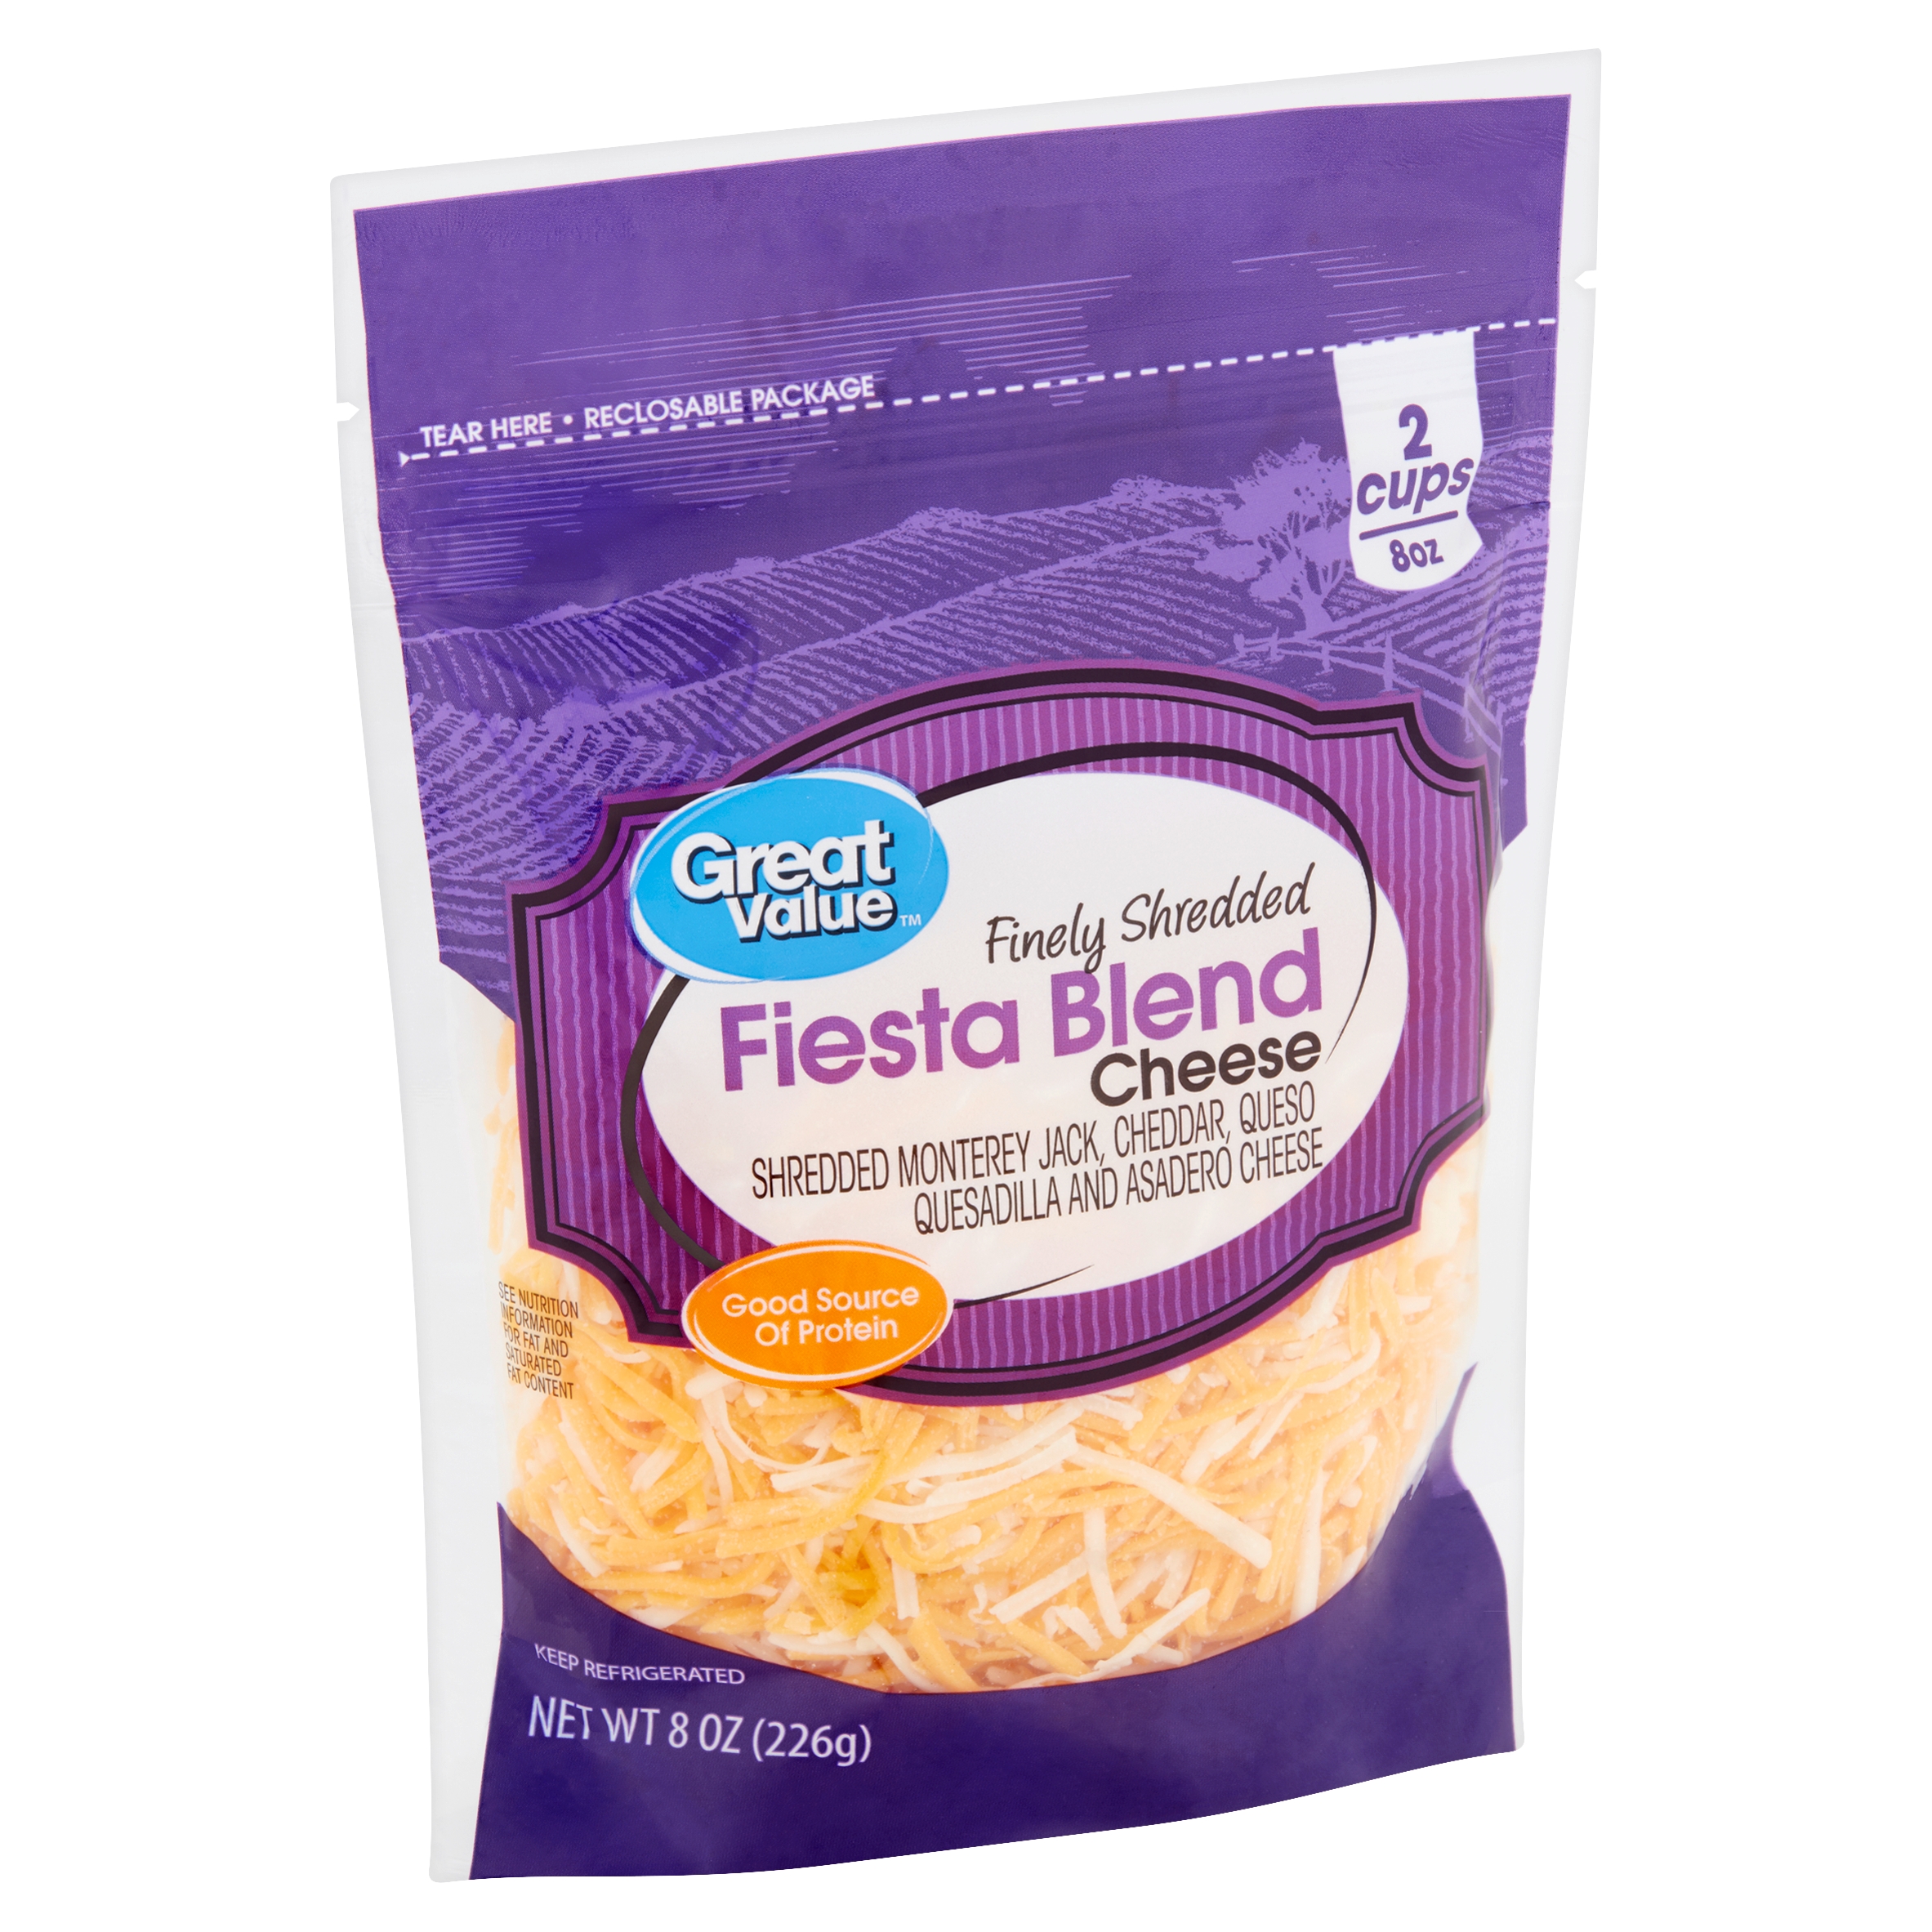 Great Value Finely Shredded Fiesta Blend Cheese, 8 Oz Image